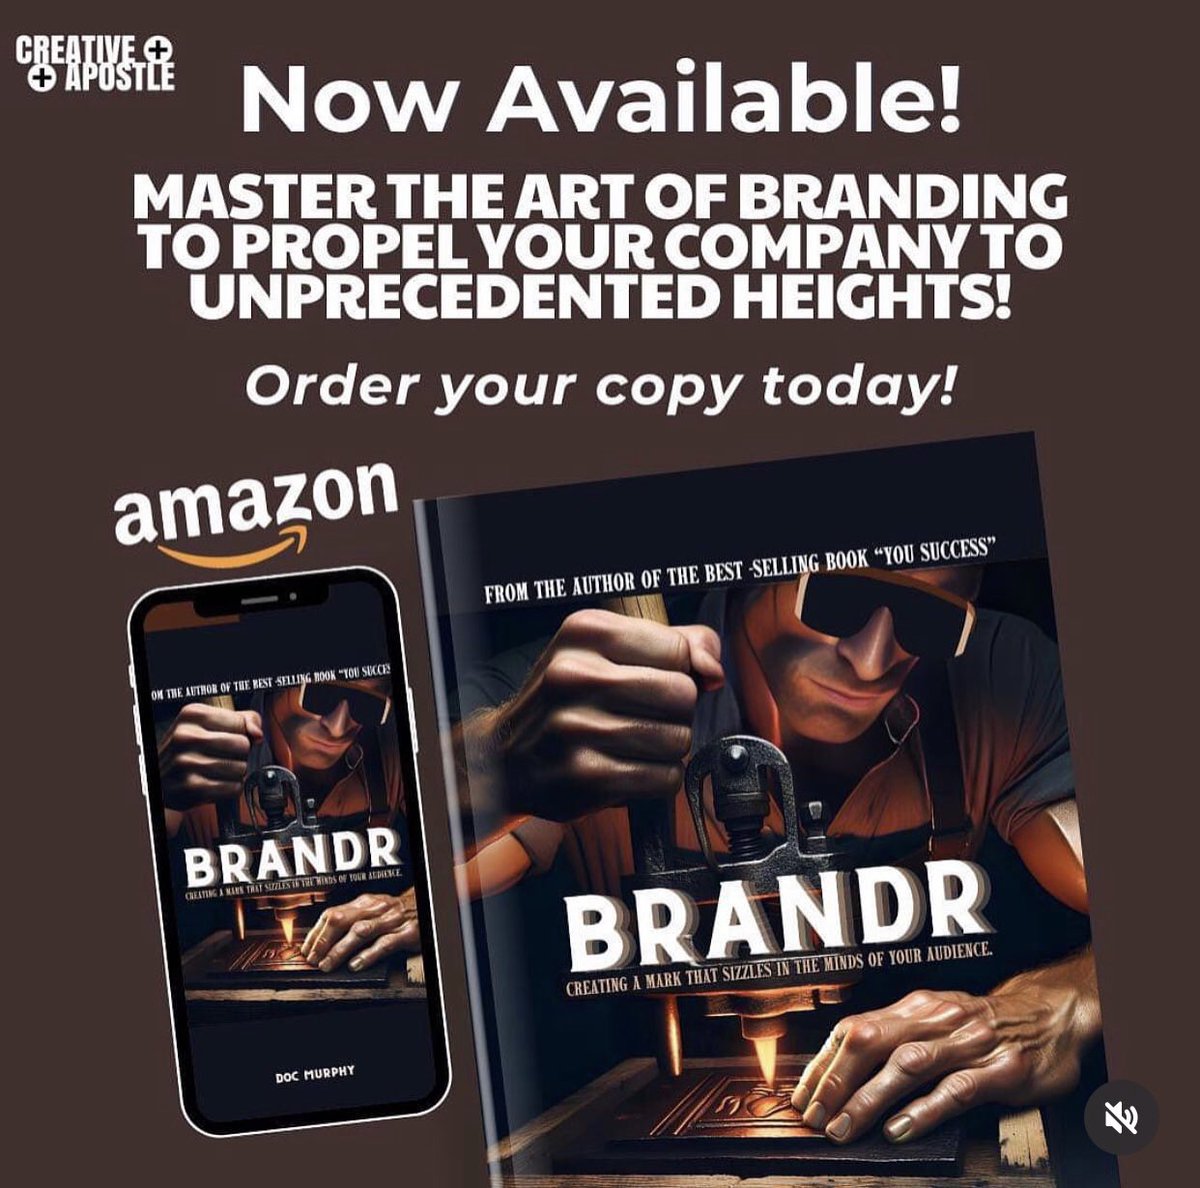 Master the Art of Branding with this powerful new Book by Doc Murphy. Order here: a.co/d/c4ssqxj

#branding #BRANDRBook #marketing #docmurphy #socialmediamarketing #yourmark #YOUsuccess #success #leadership #business #entrepreneurs #tips #businesscoaching #brandingtips